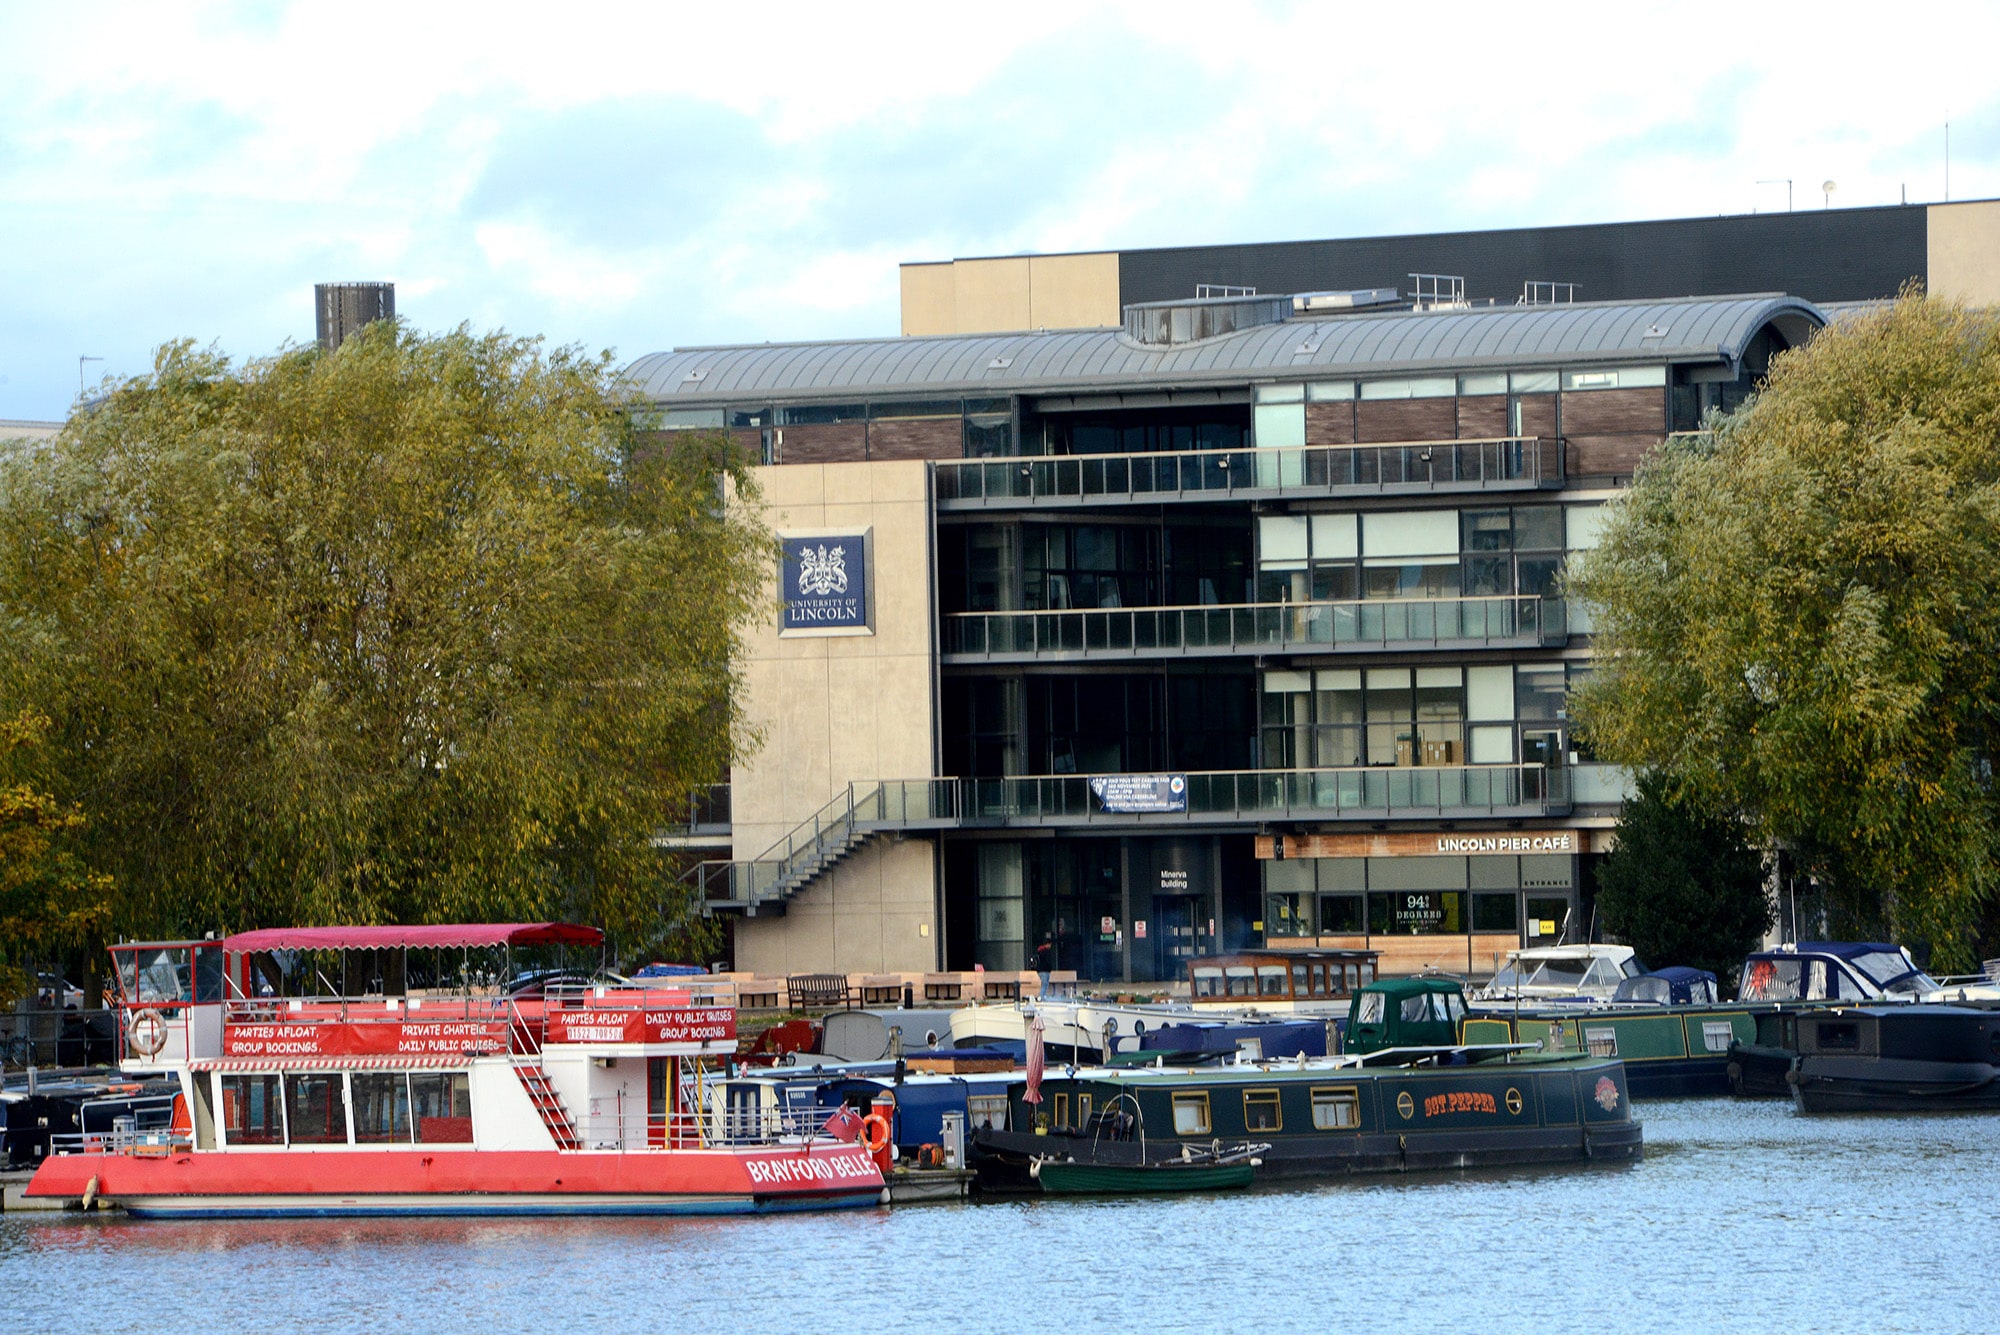 View of the Minerva building over the Brayford Pool Waterfront